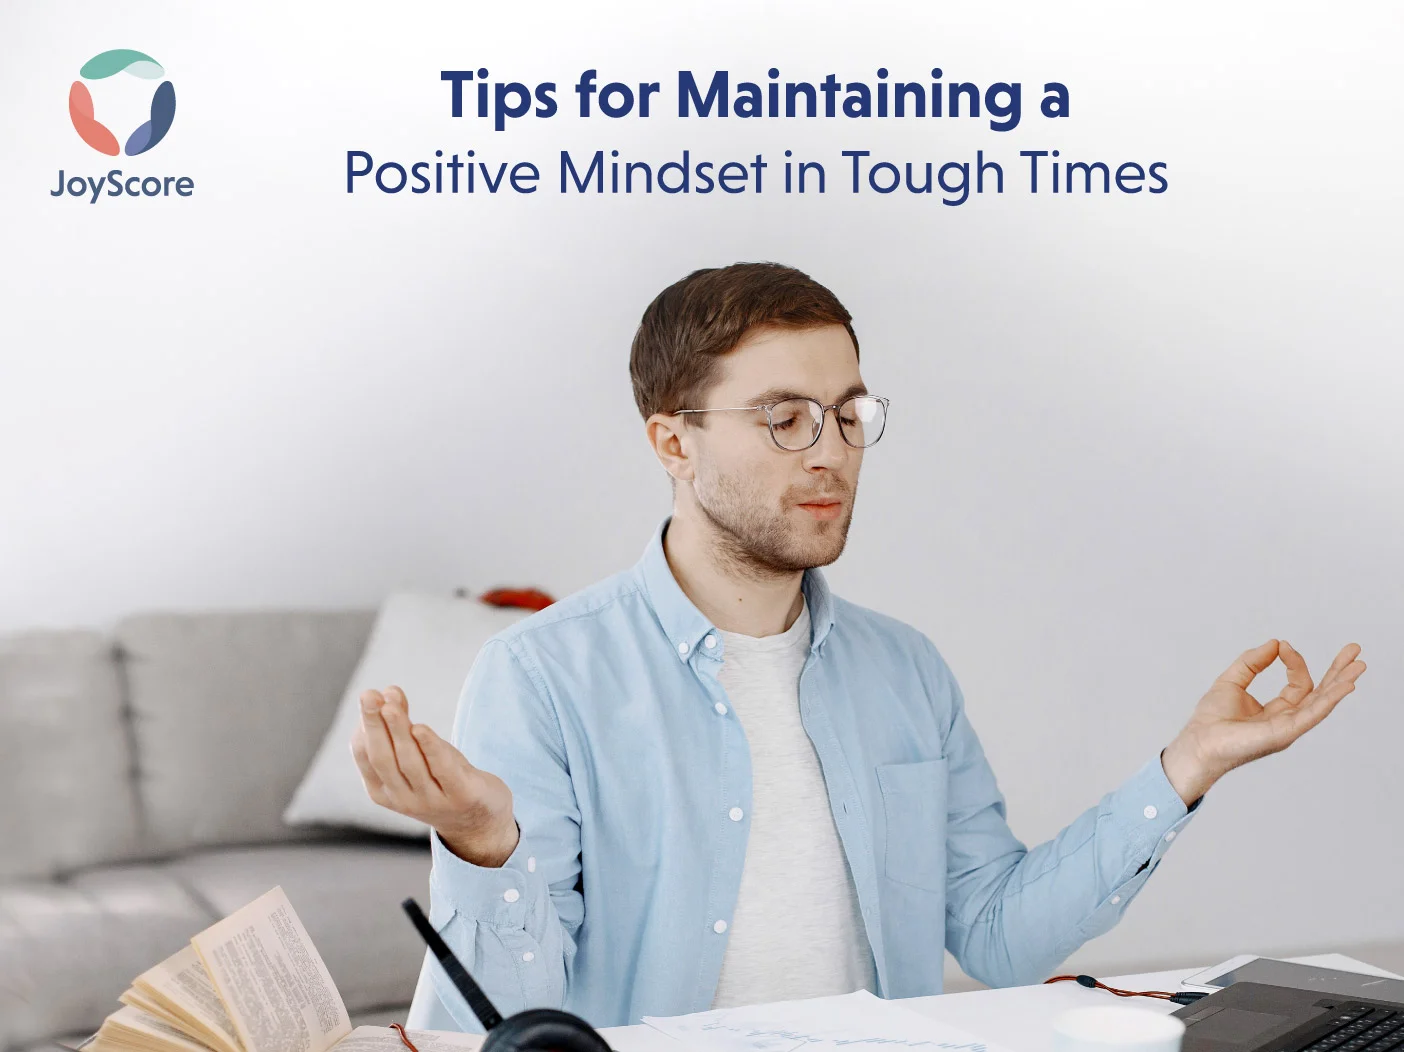 Tips for keeping a positive mindset when everything is going wrong